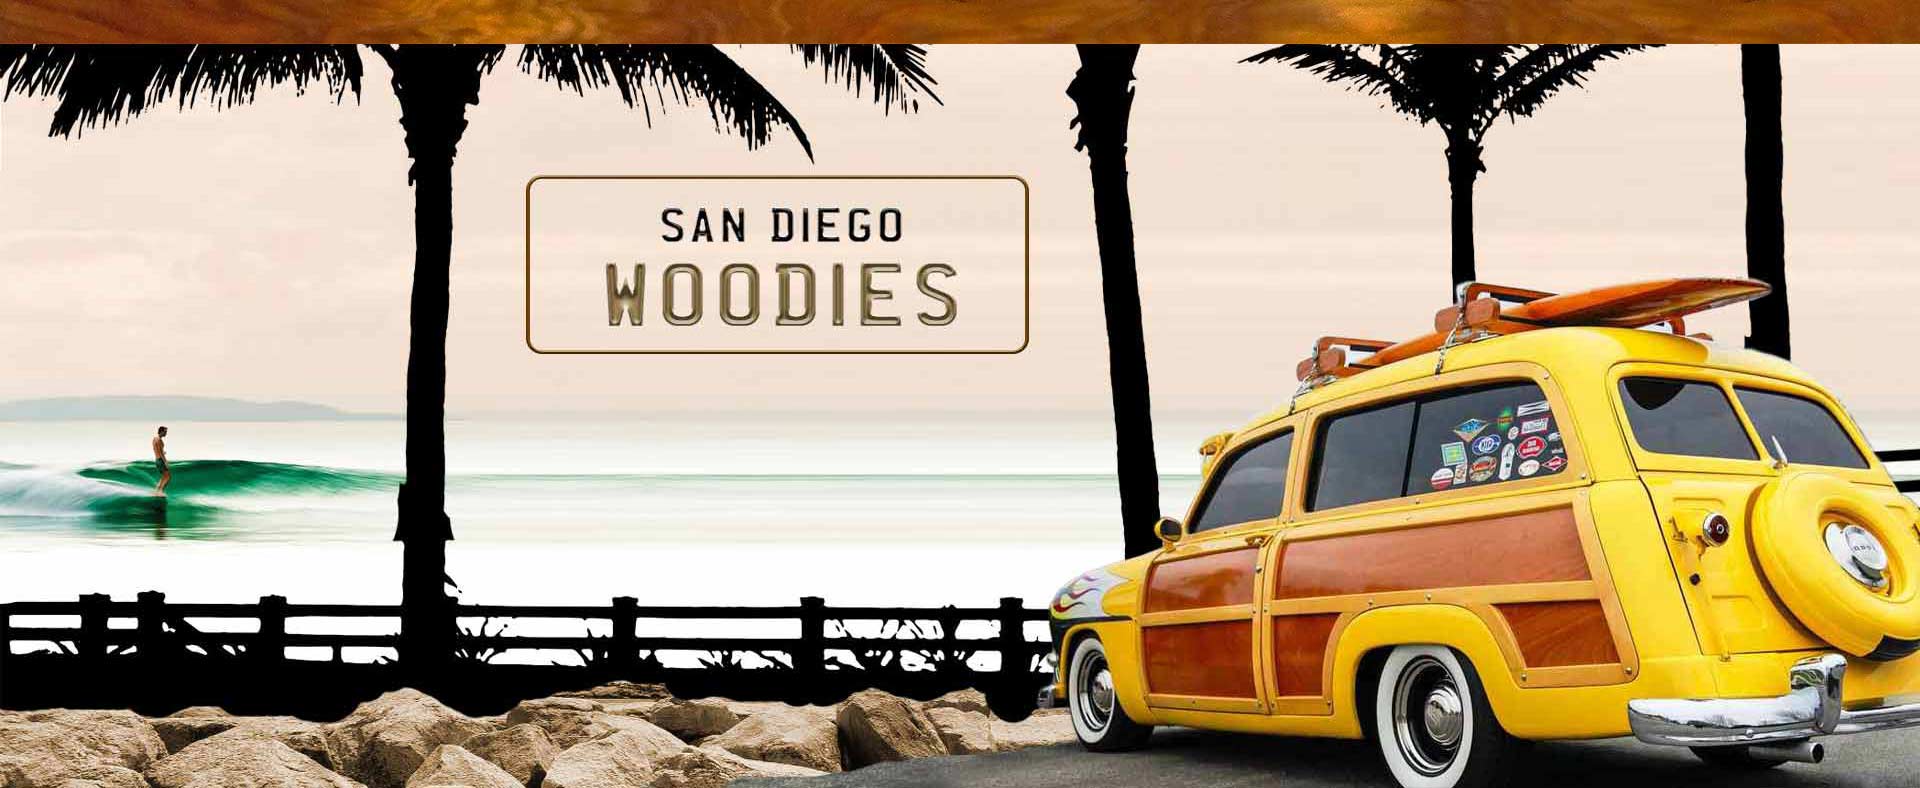 Woodies banner image with woody car and surfer